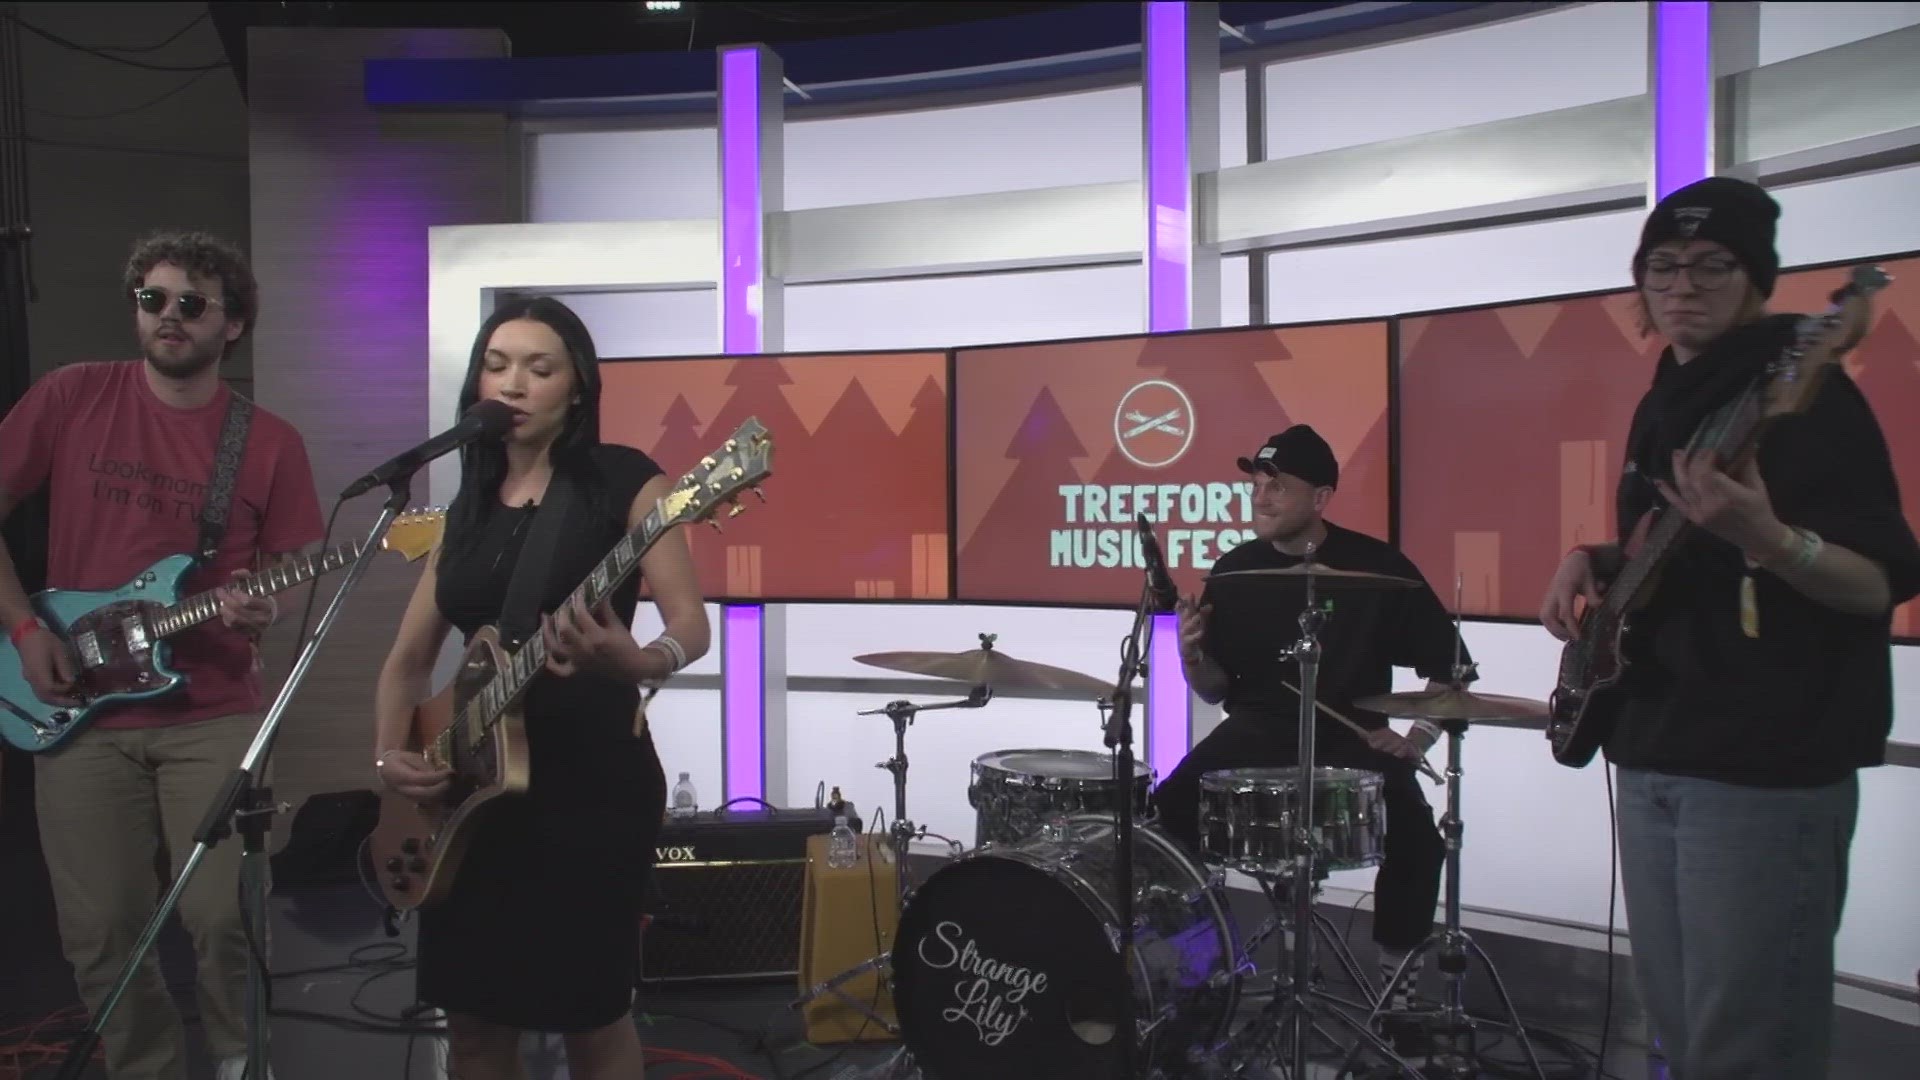 Songwriter and guitarist Chloe Elise and Strange Lily perform live on KTVB ahead of their Treefort Music Fest show at Old School on Sunday at 2 p.m.